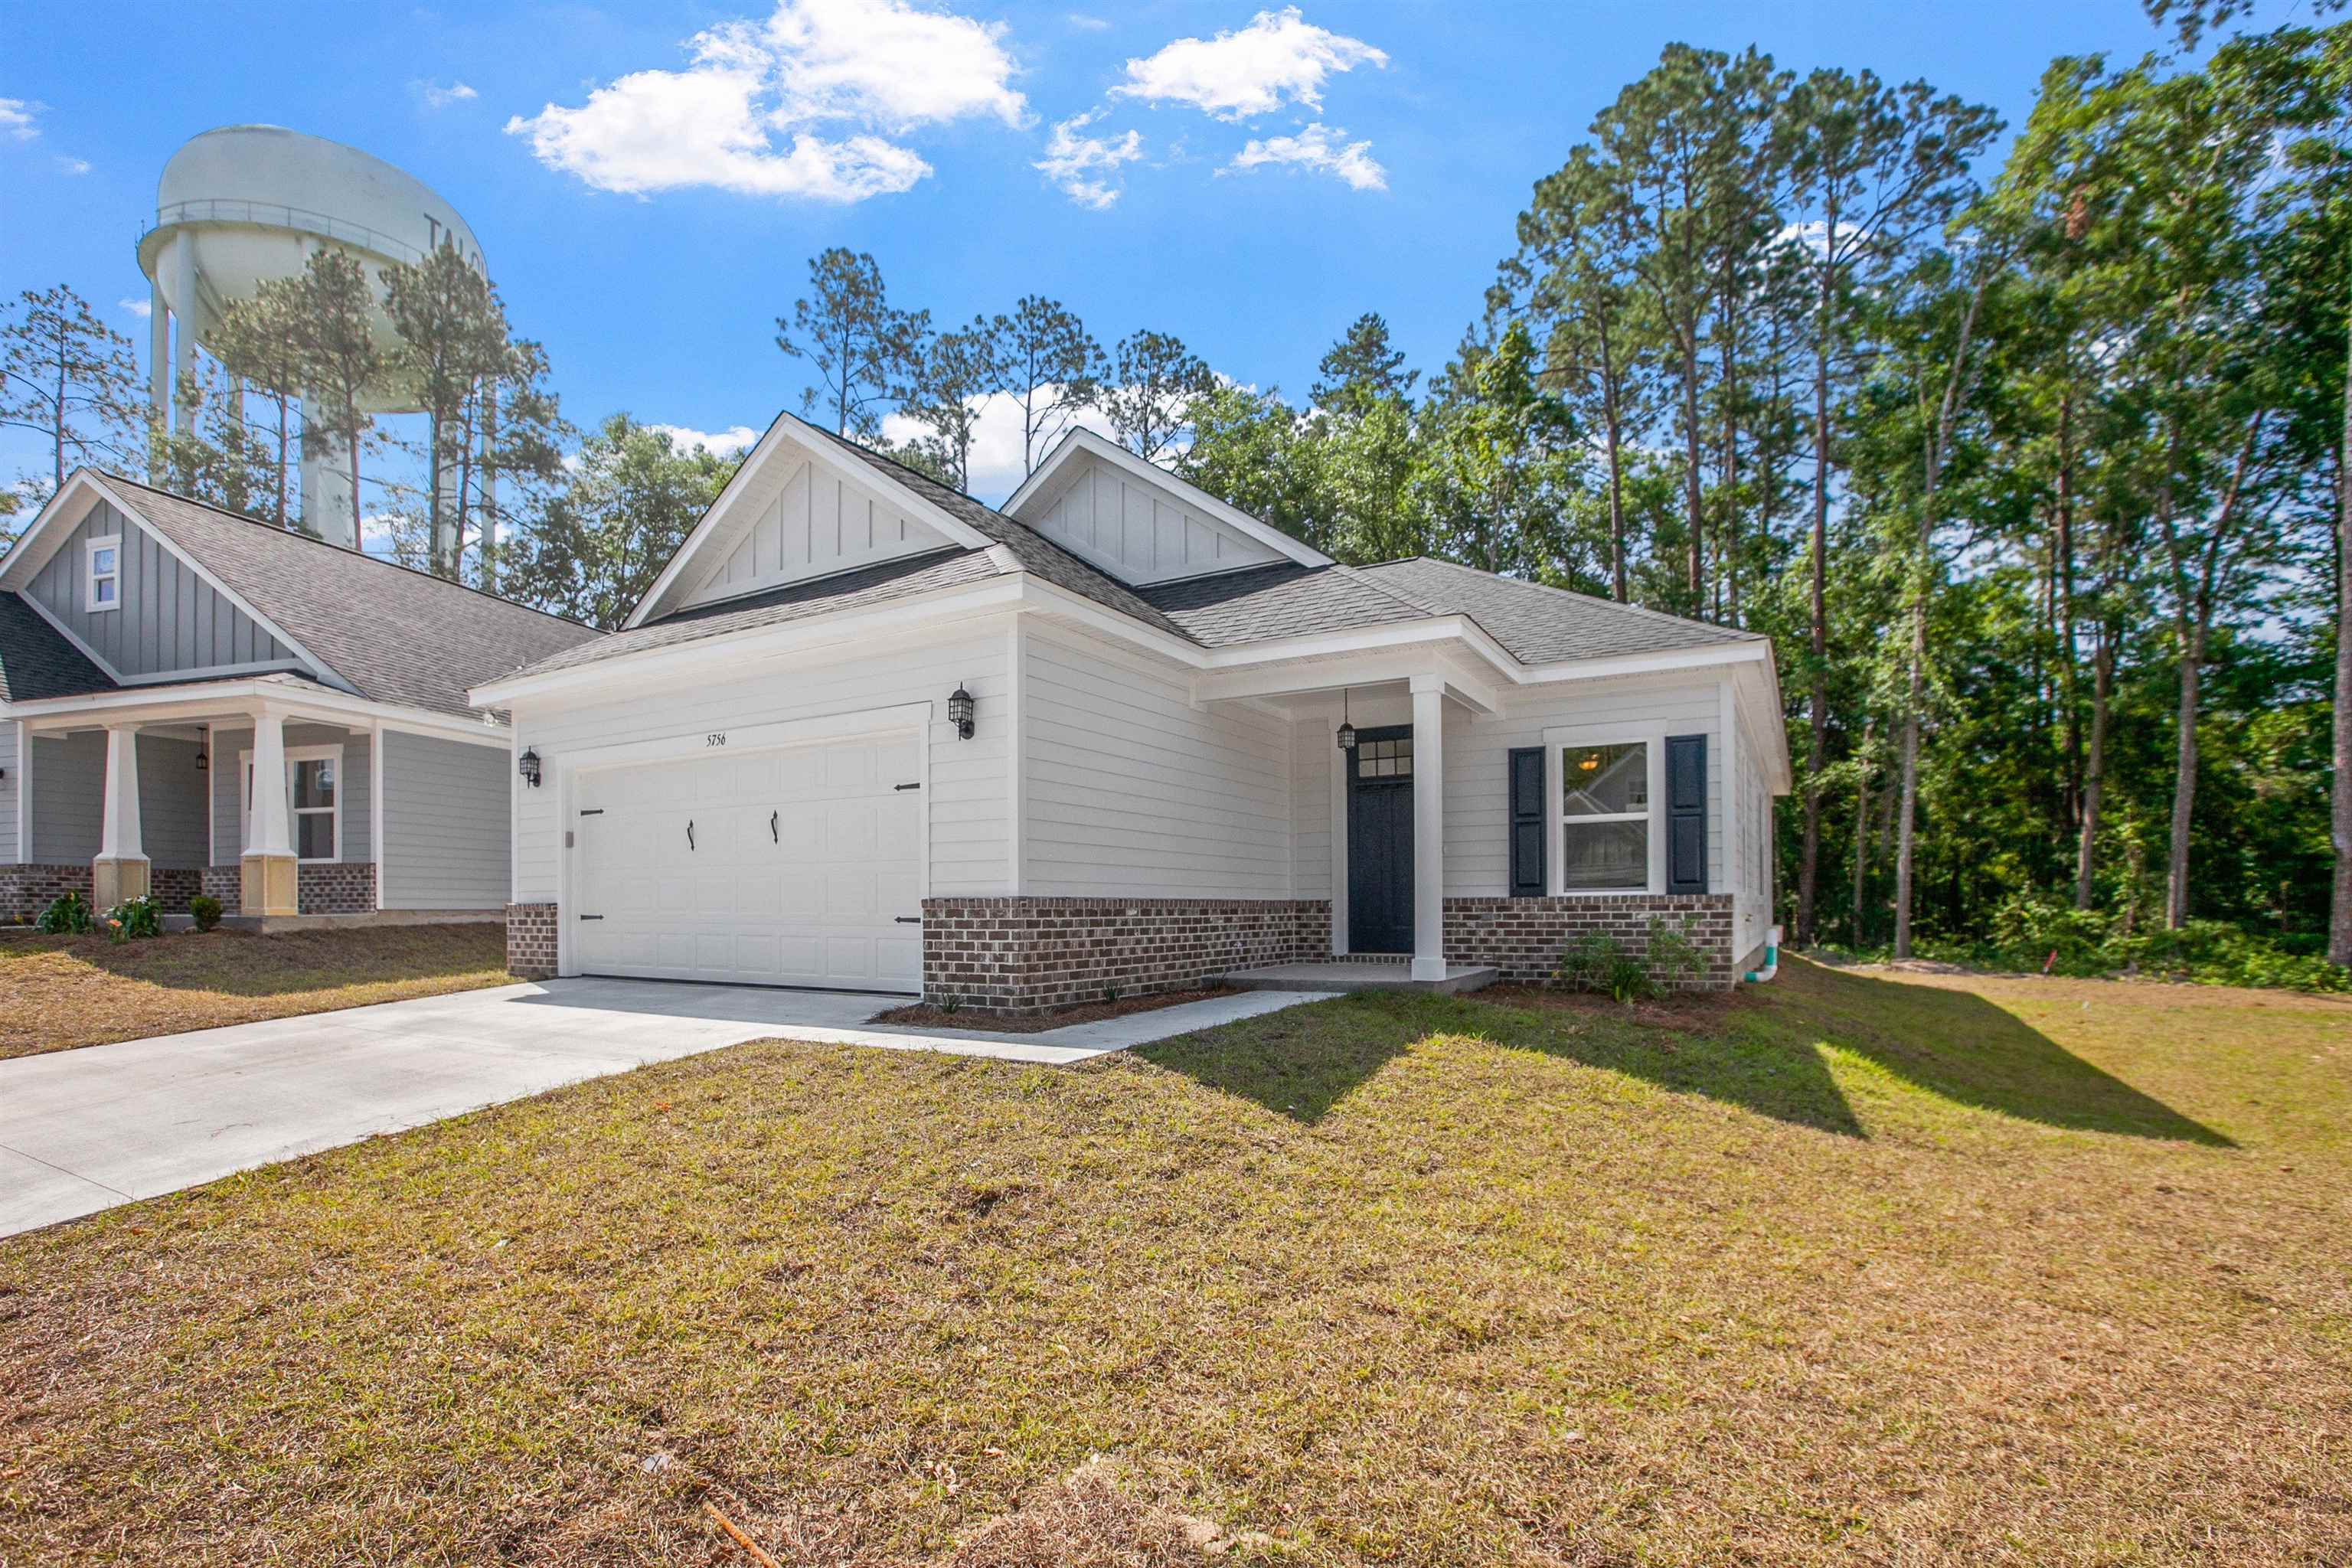 5400 River Reserve Lane,TALLAHASSEE,Florida 32303,3 Bedrooms Bedrooms,2 BathroomsBathrooms,Detached single family,5400 River Reserve Lane,369769